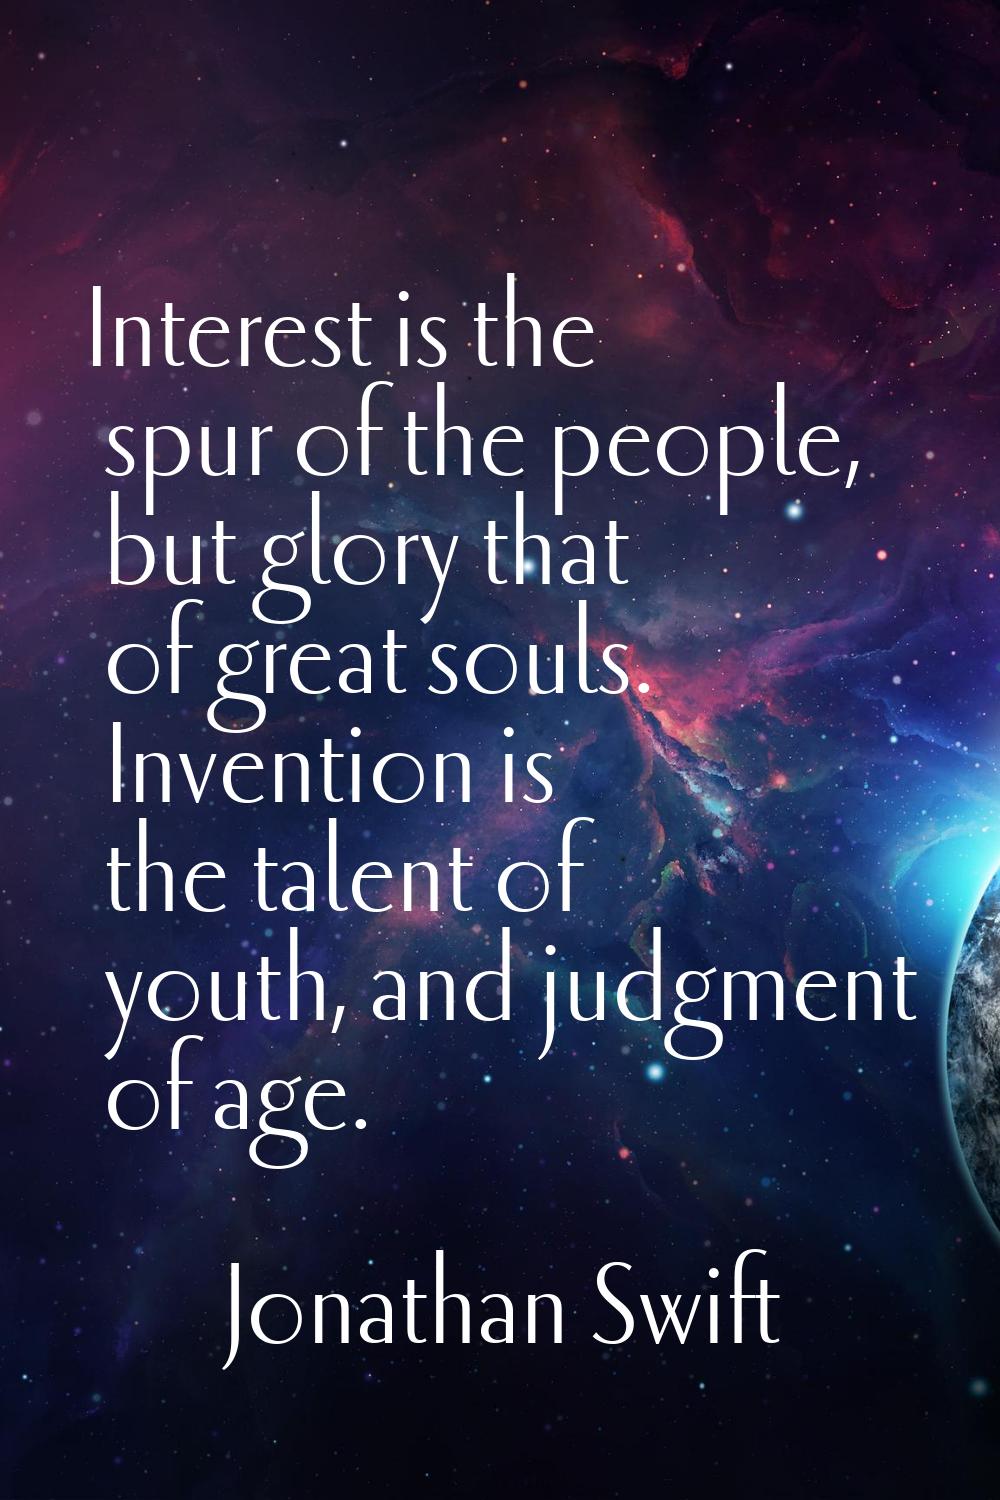 Interest is the spur of the people, but glory that of great souls. Invention is the talent of youth